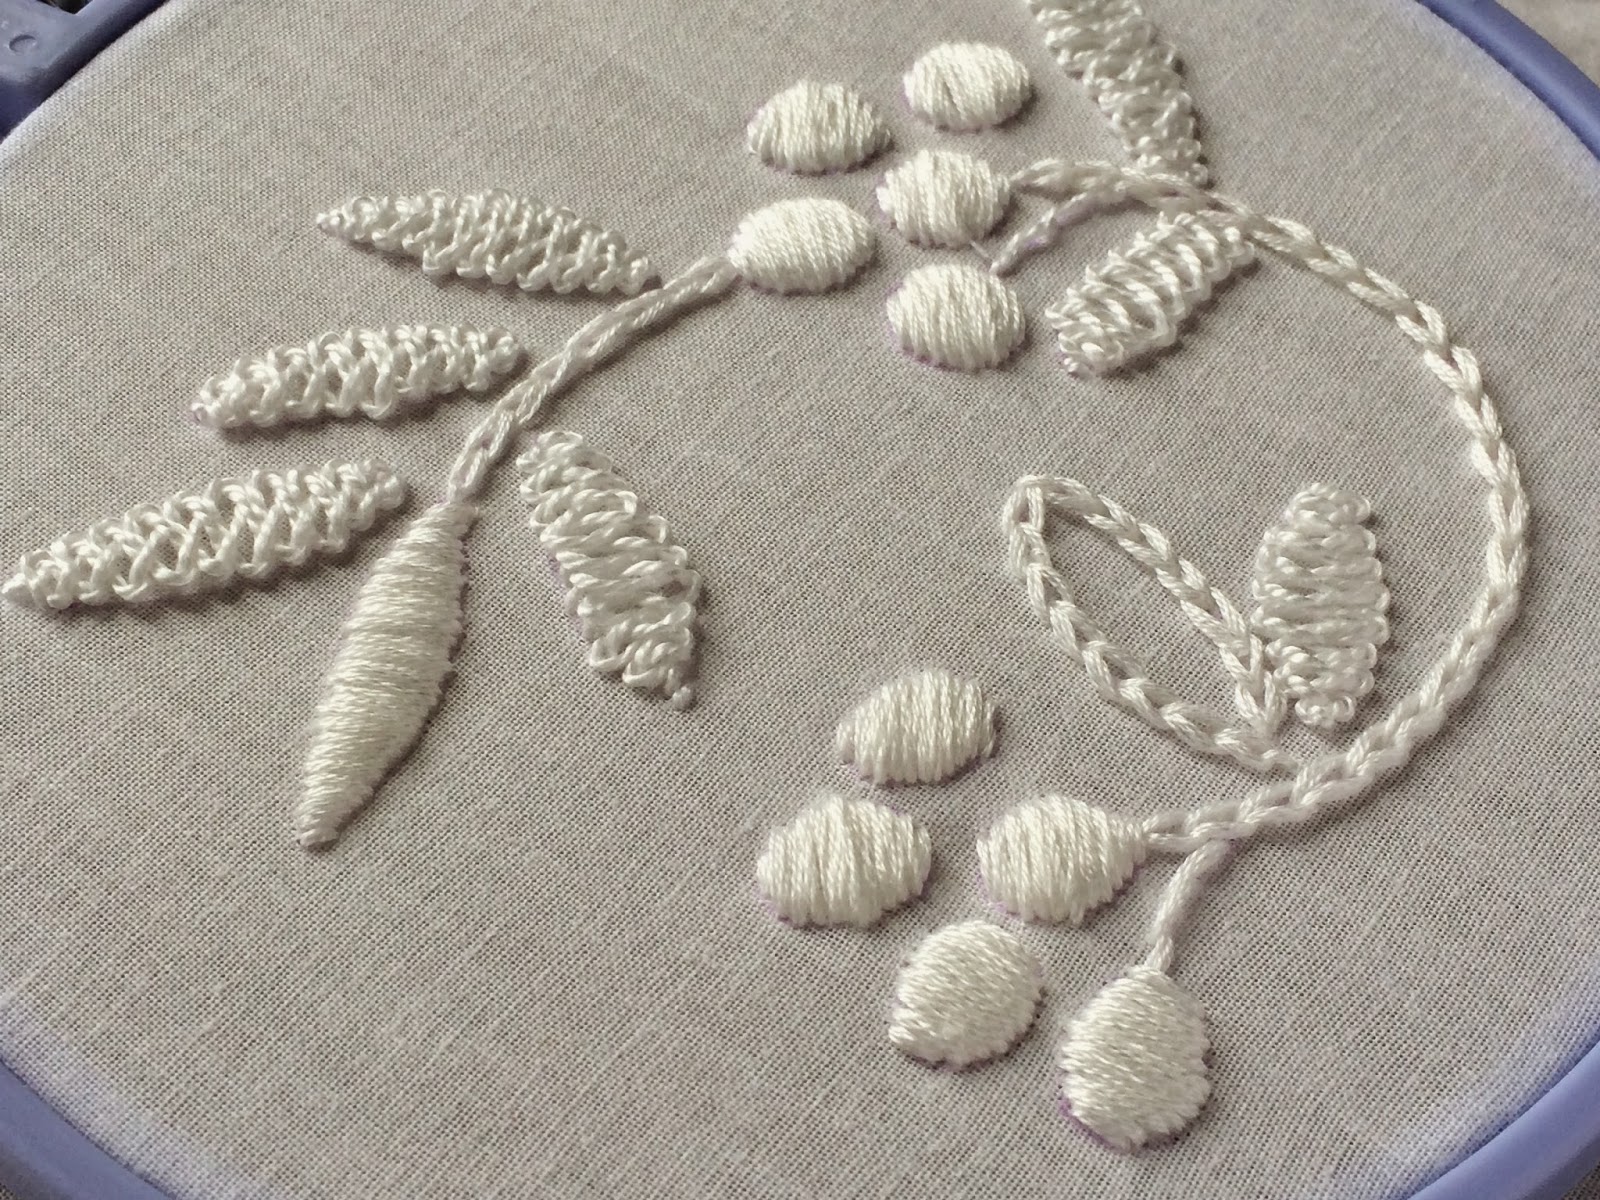 Cable Plait stitch, a tutorial by Michelle for Mooshiestitch Monday on Feeling Stitchy